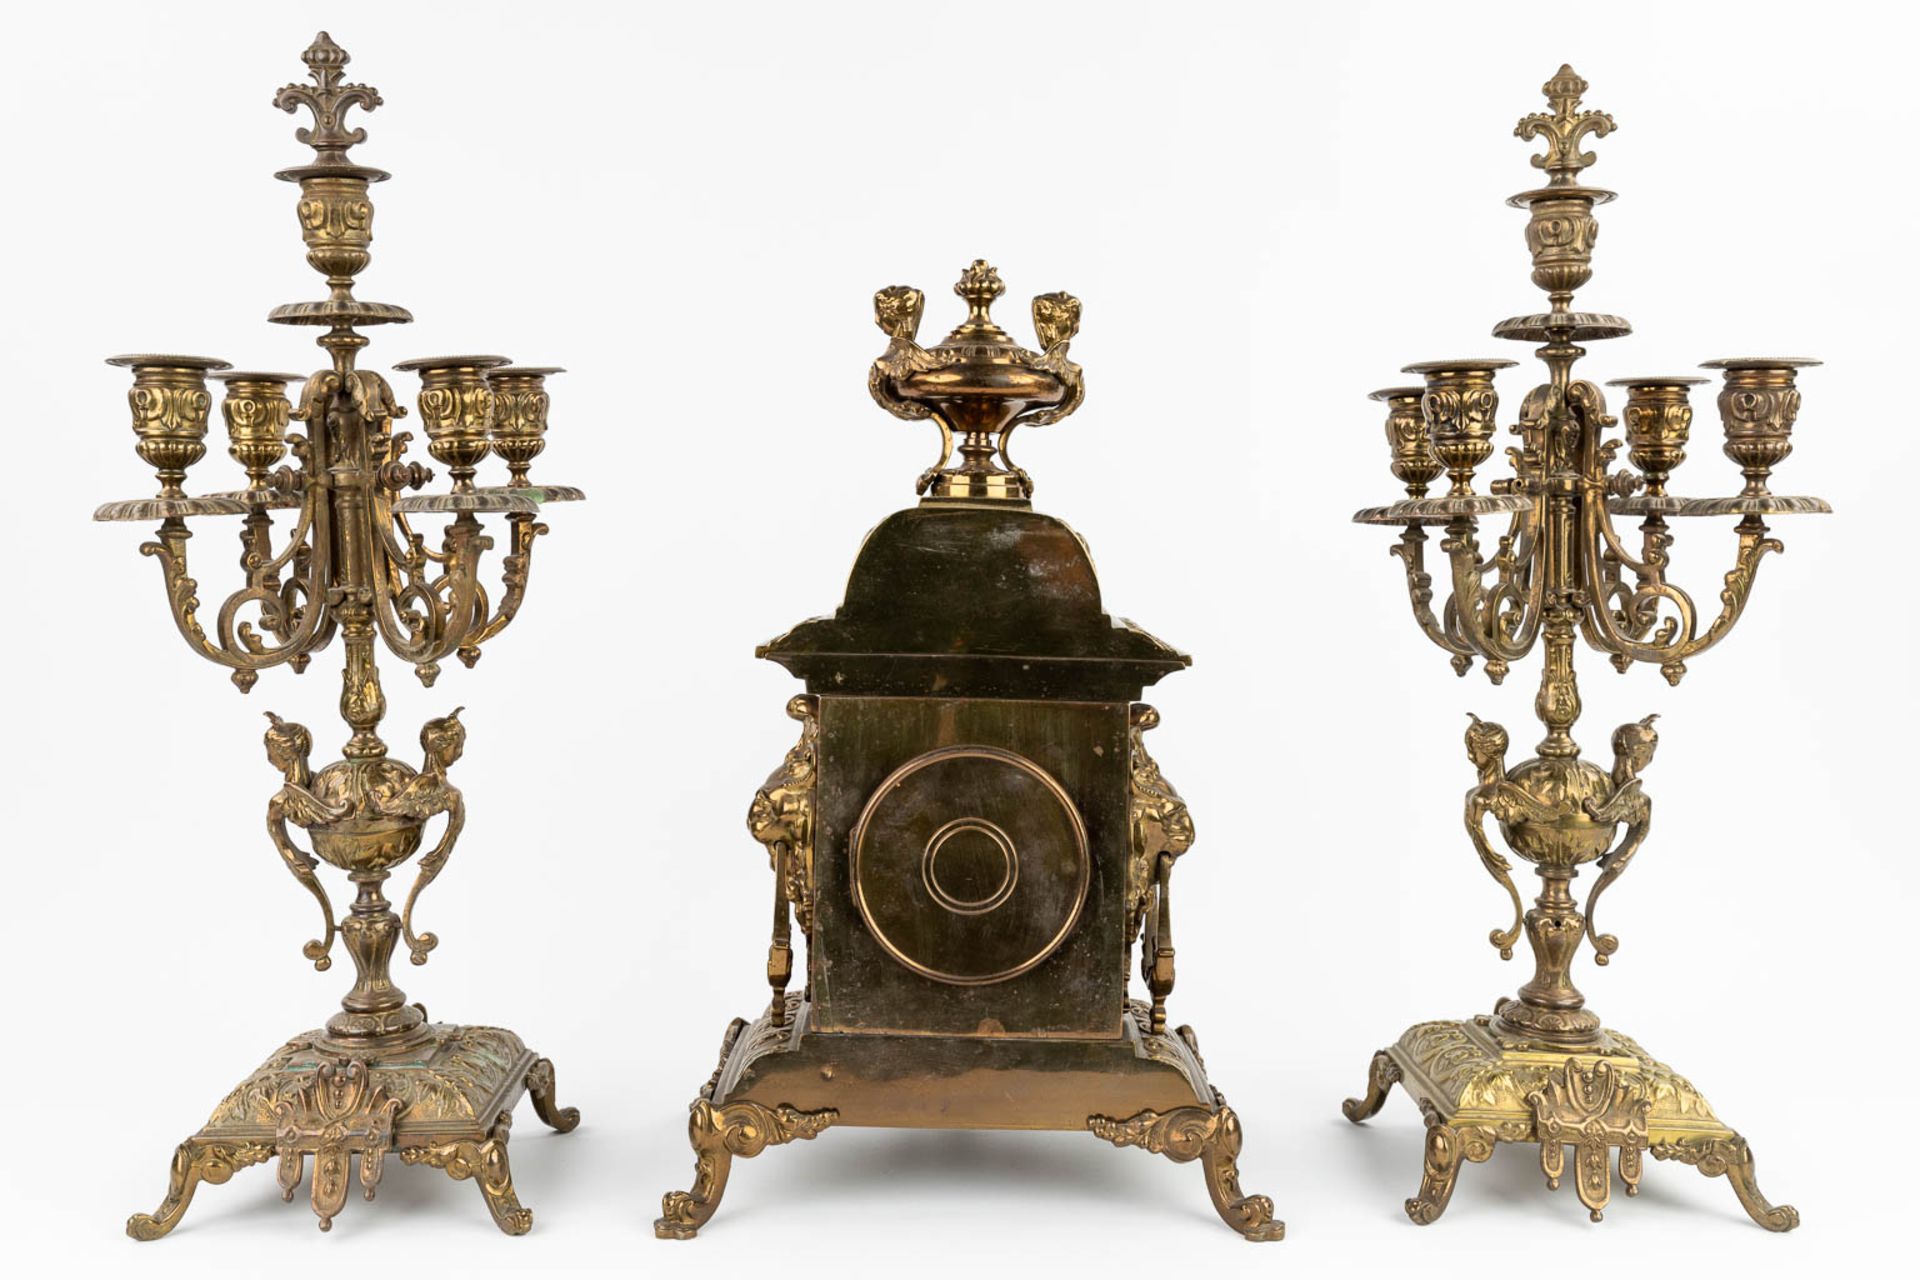 A three-piece mantle garniture clock and candelabra, made of bronze. (20 x 29 x 45cm) - Image 12 of 17